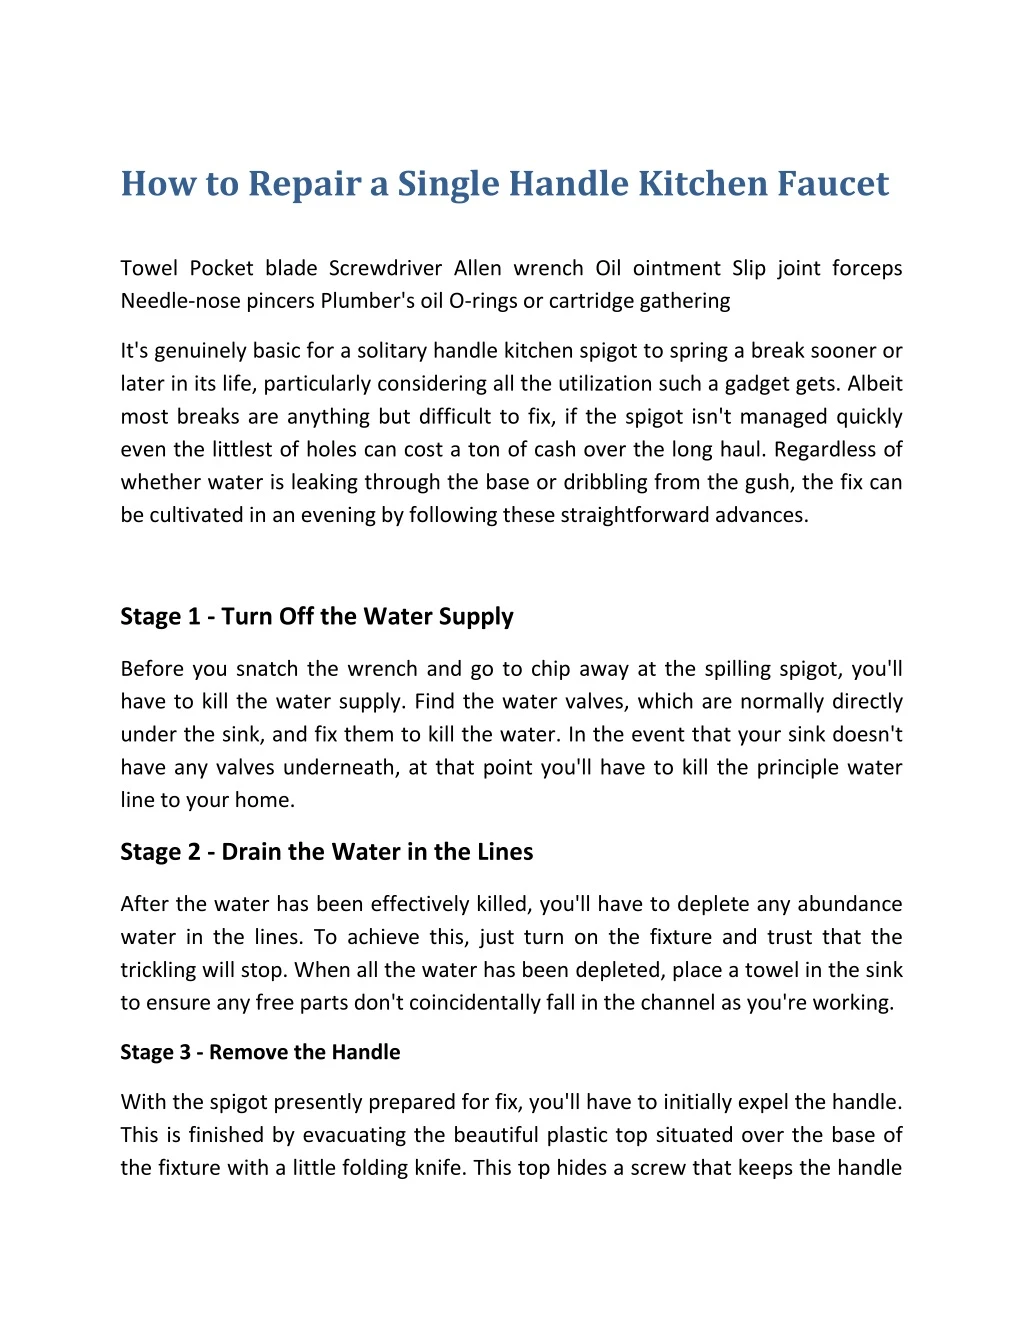 how to repair a single handle kitchen faucet